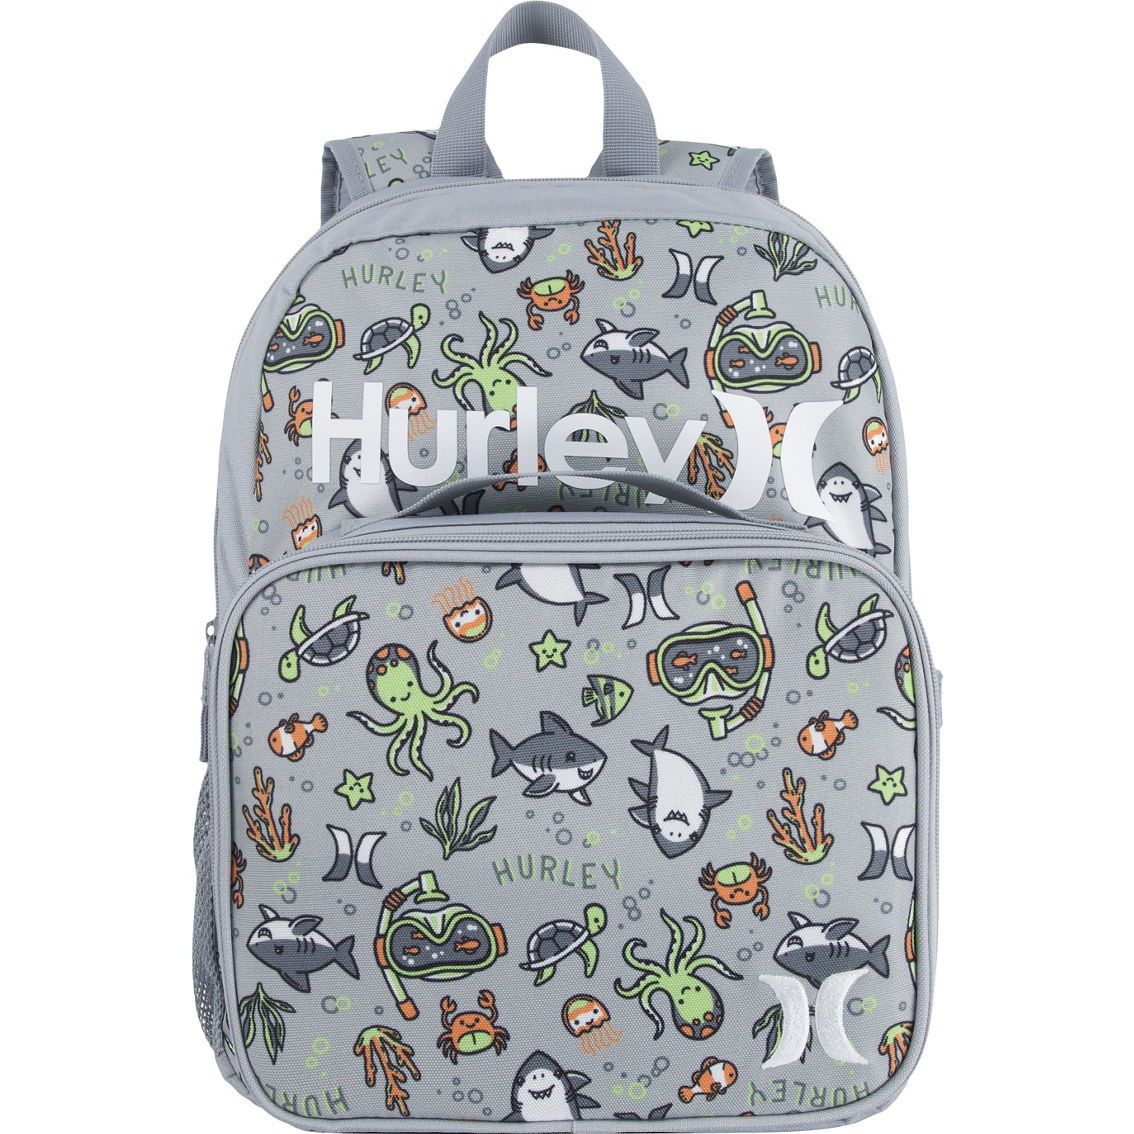 Hurley One and Only Backpack and Lunch Combo - Image 2 of 10